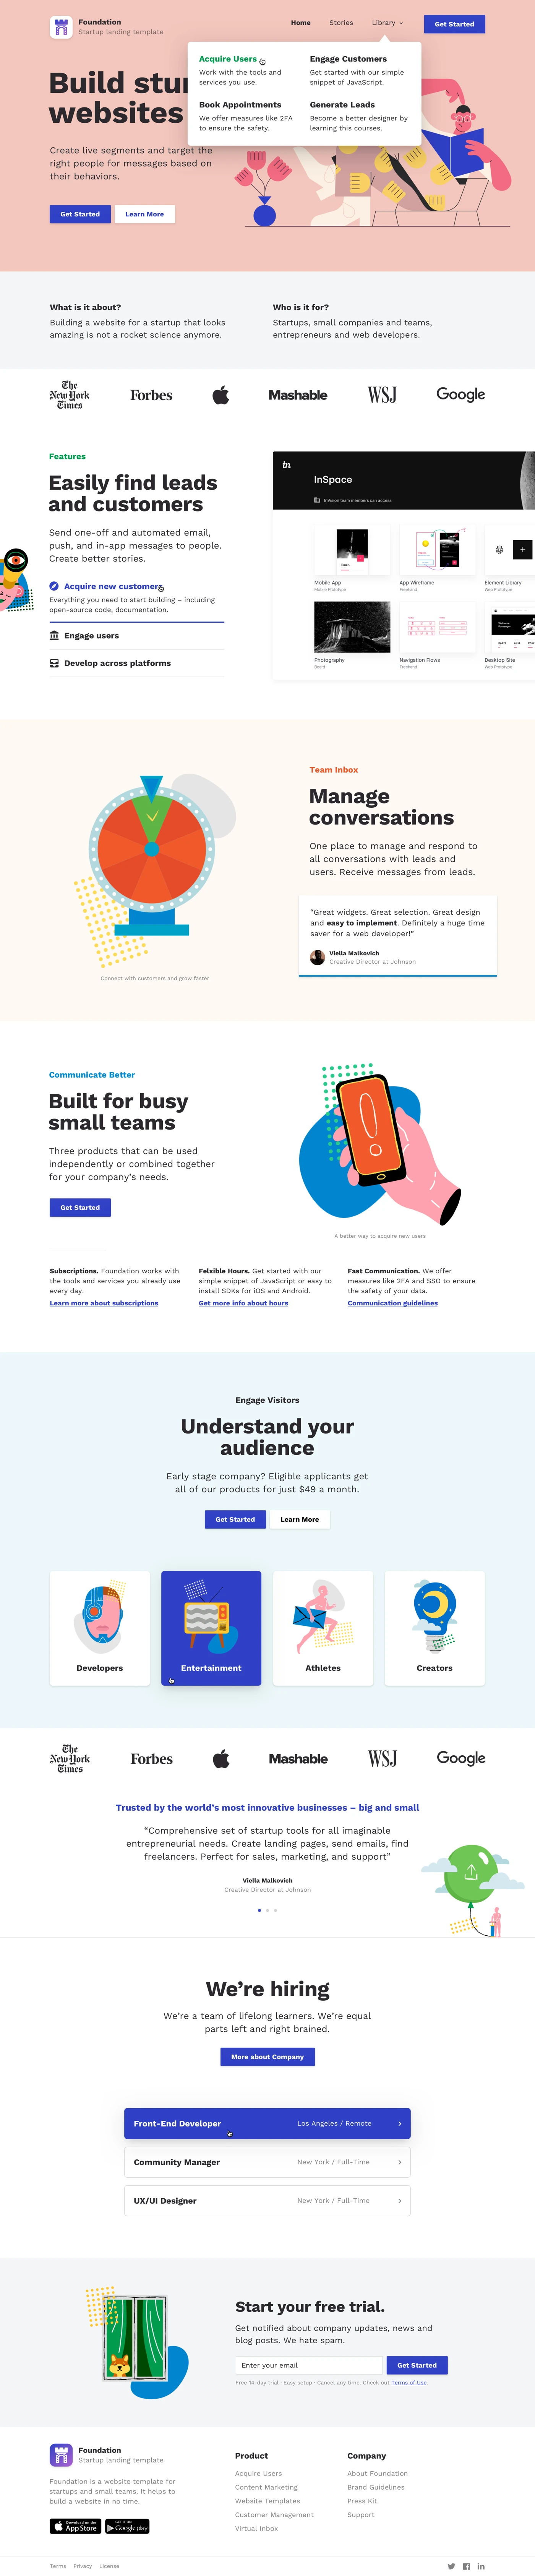 Foundation - Free Landing Page Design - Foundation is a free website design template for Sketch App. It consists of 5 premade pages and many pre-designed blocks. Foundation fits perfect for everyone who wants to design a website for a startup or a landing page. It uses free fonts from Google, free illustrations and icons.